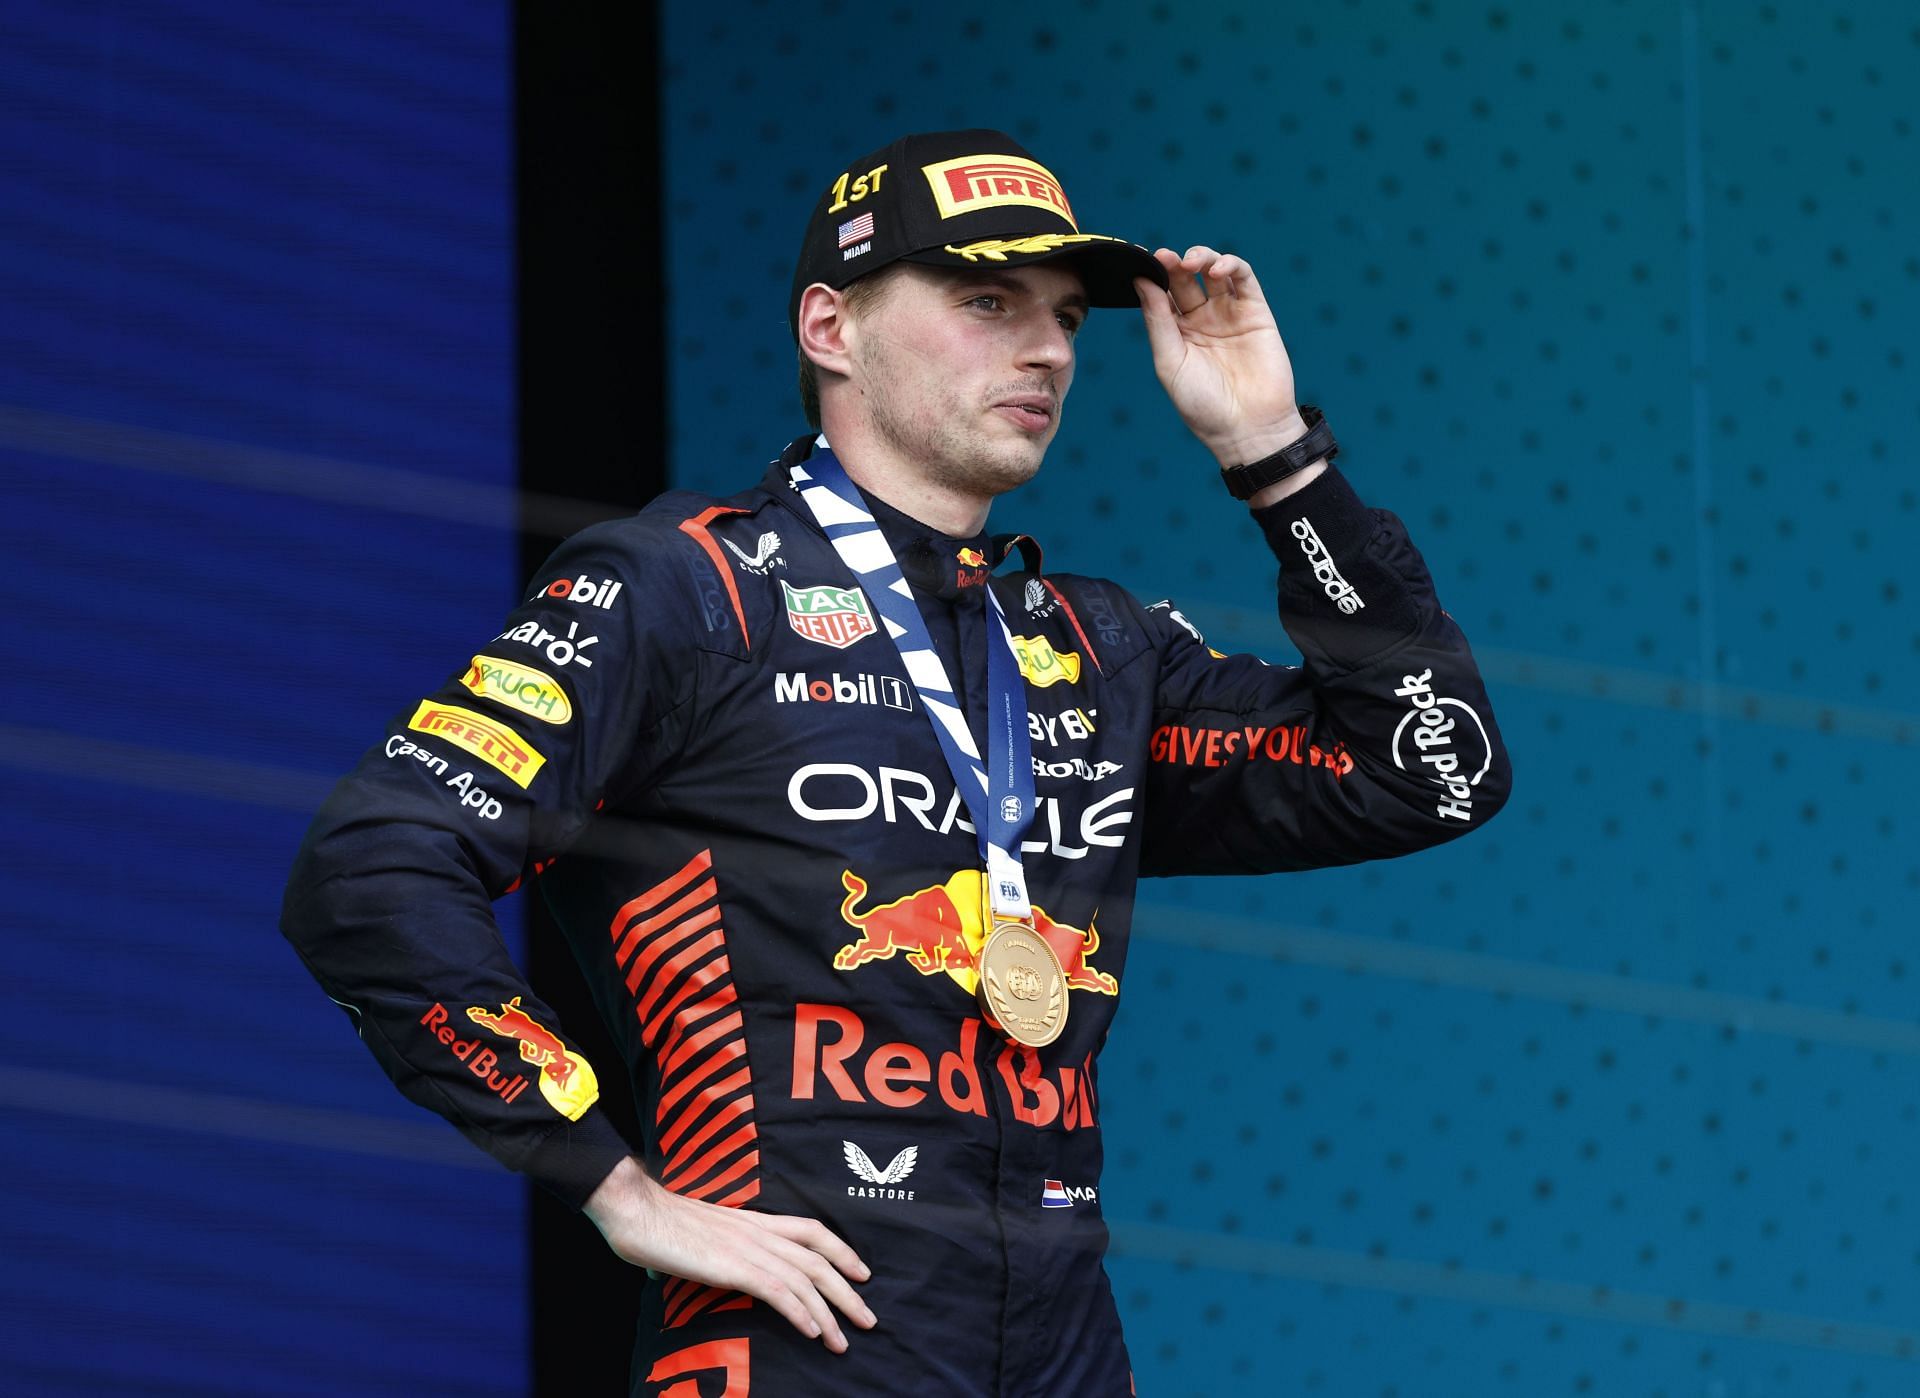 Max Verstappen: “It's exciting to see Formula 1 getting much bigger in the  US” - The Checkered Flag